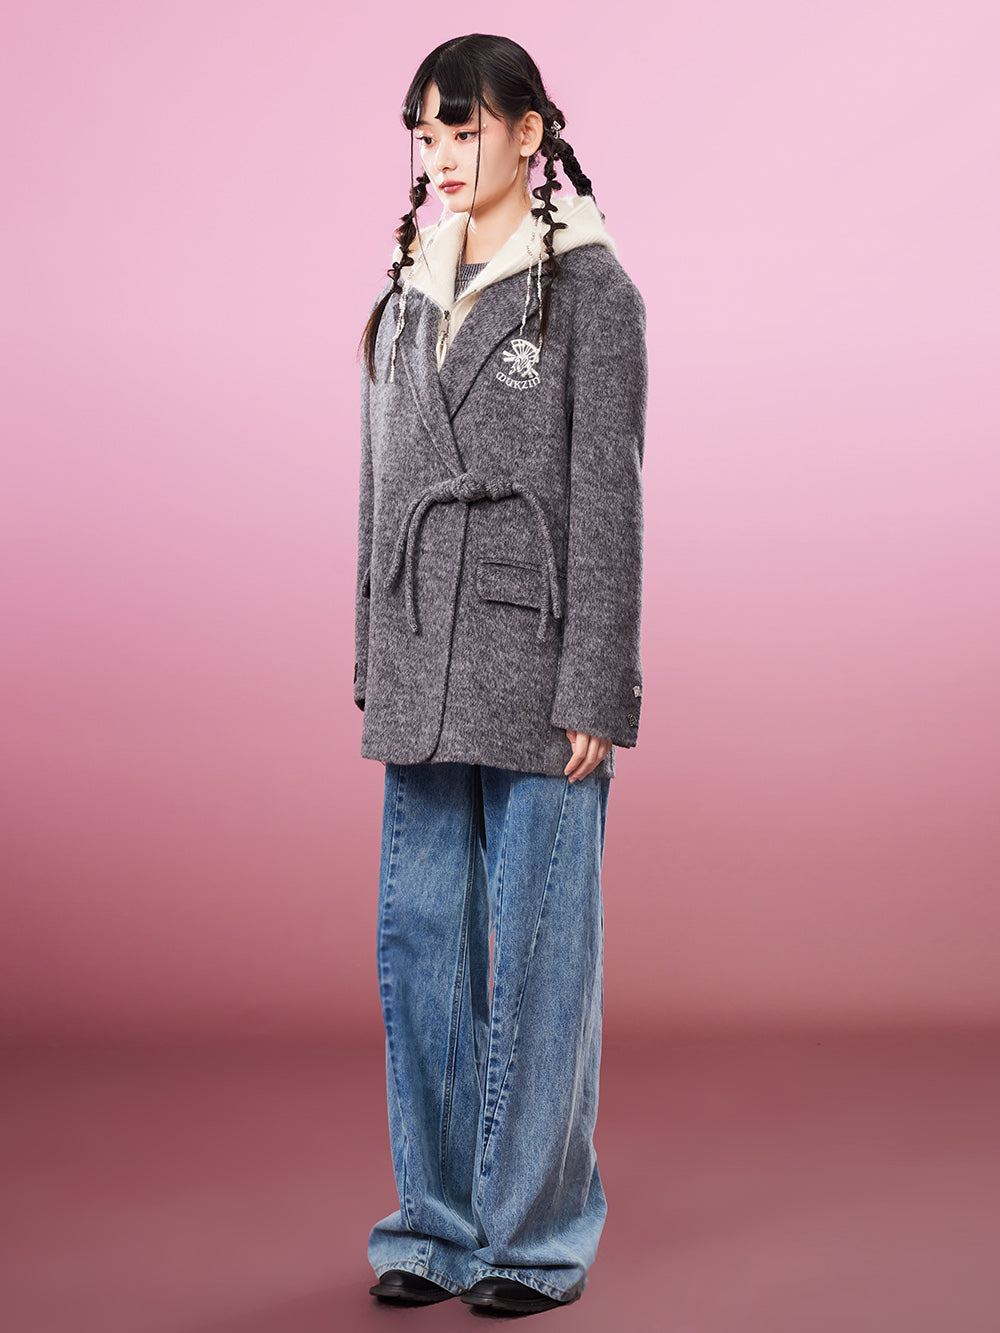 MUKZIN Gray/Pink Lively Double-faced Woolen Coat